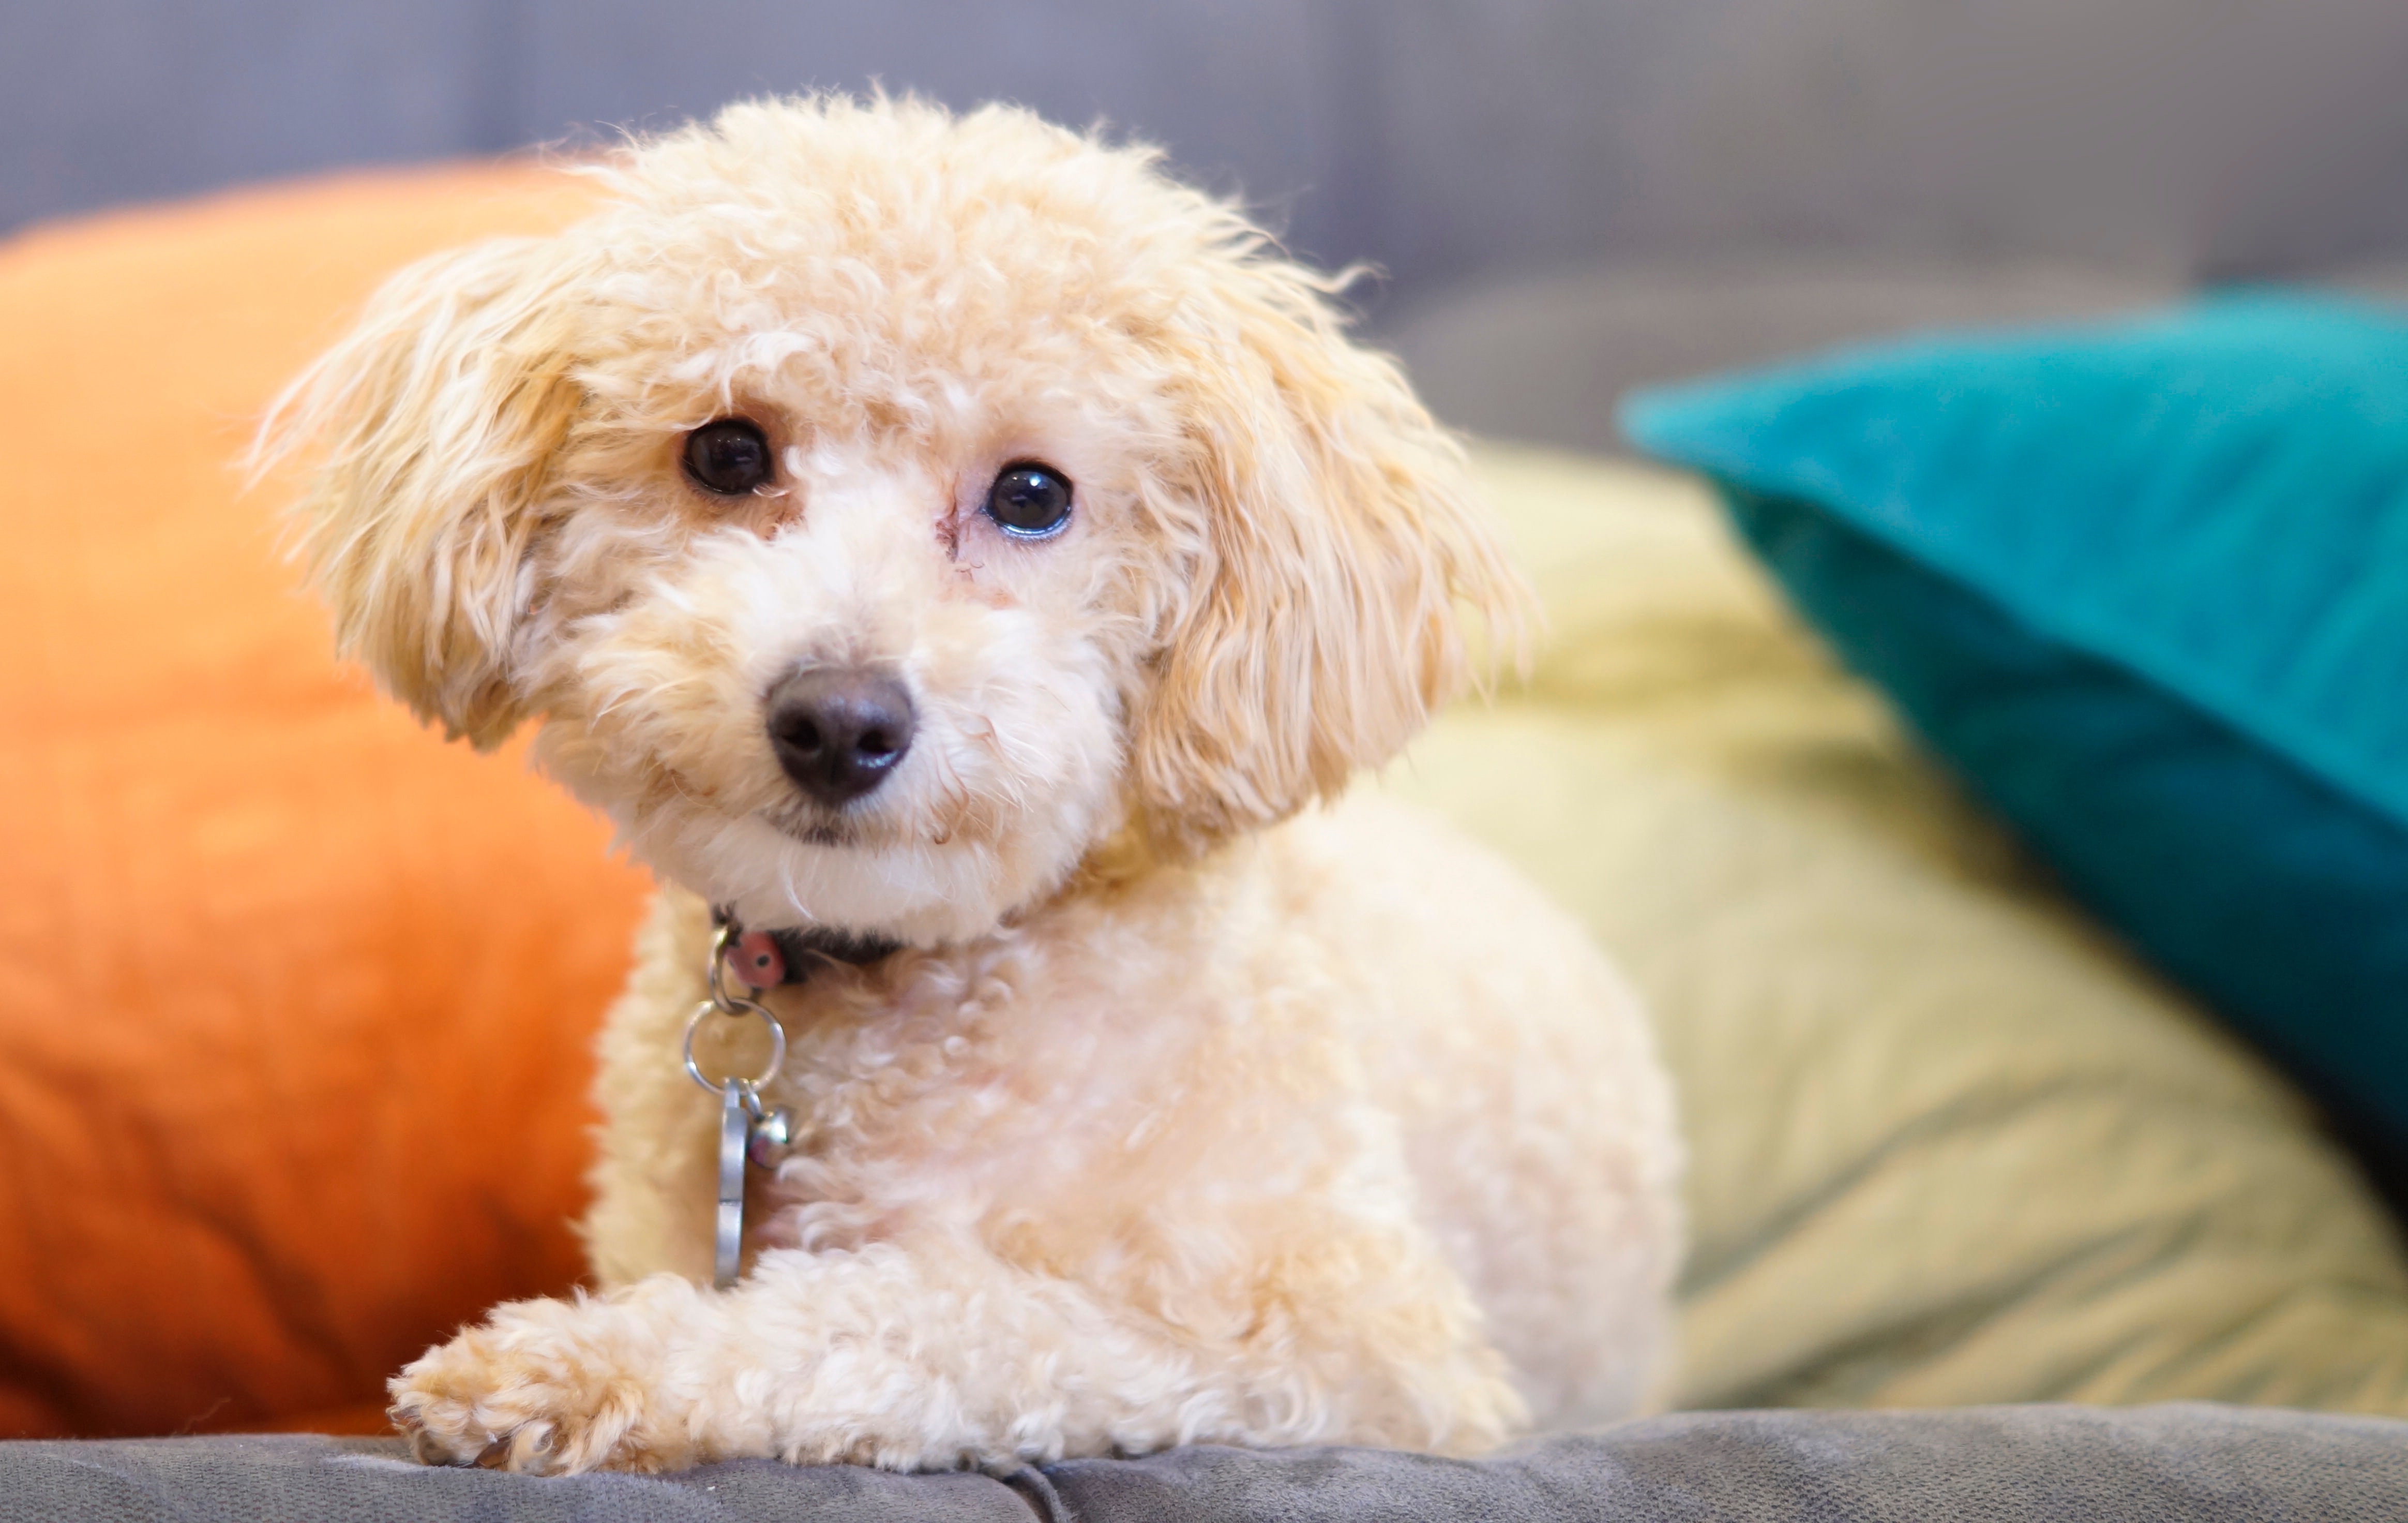 tan mini poodle sitting on a couch